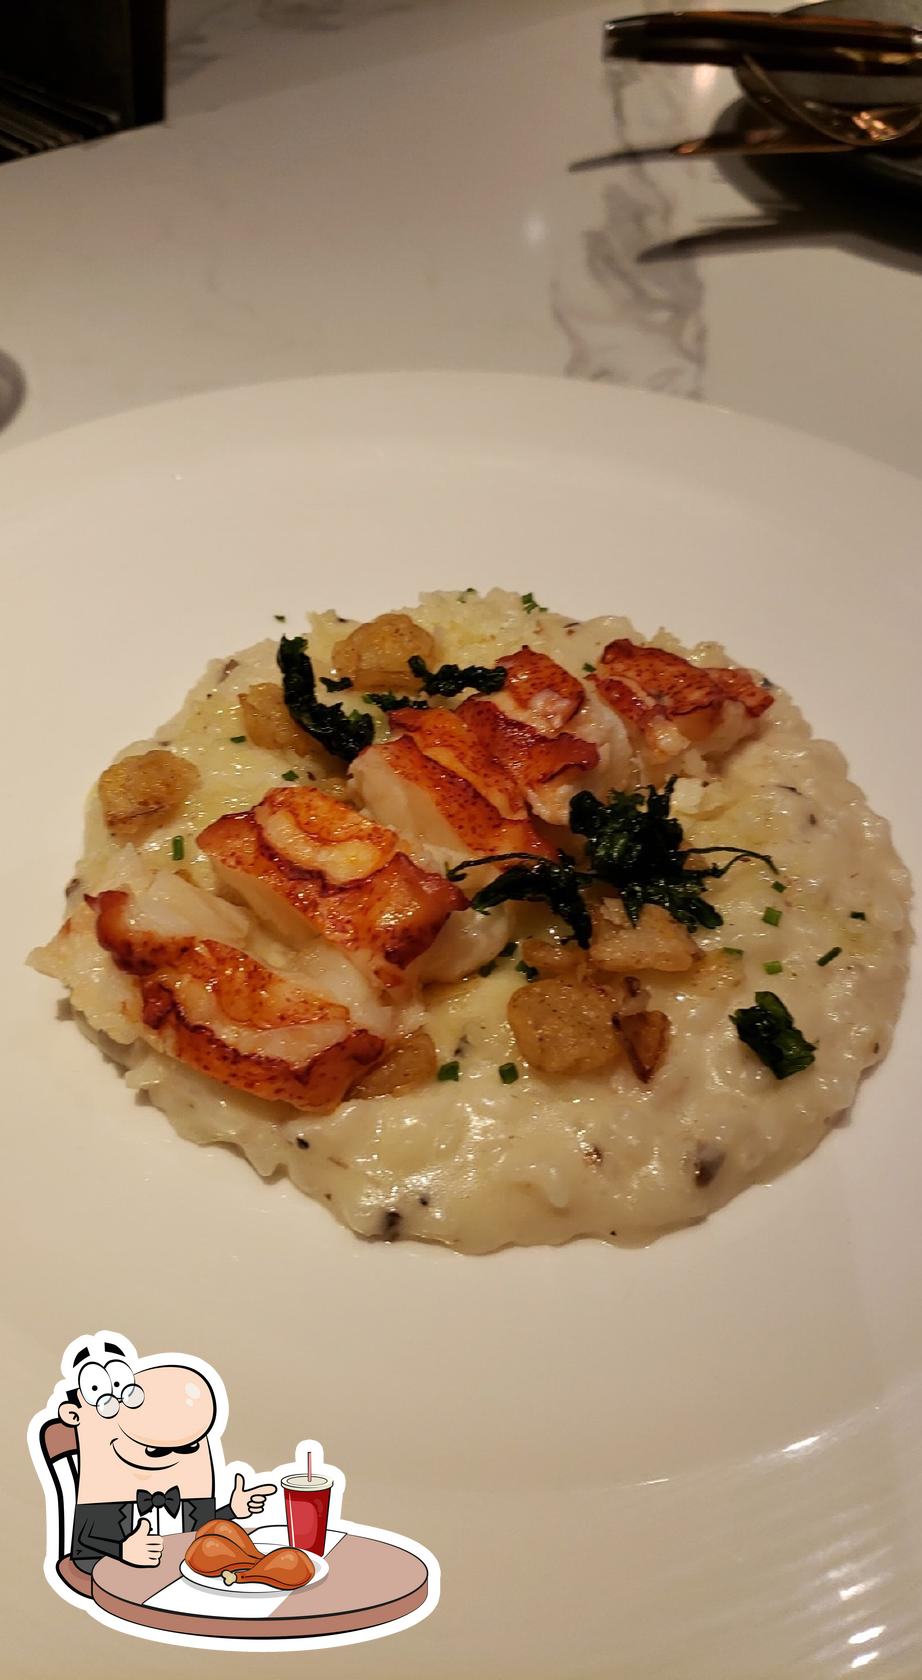 gordon ramsay risotto recipe from hell's kitchen